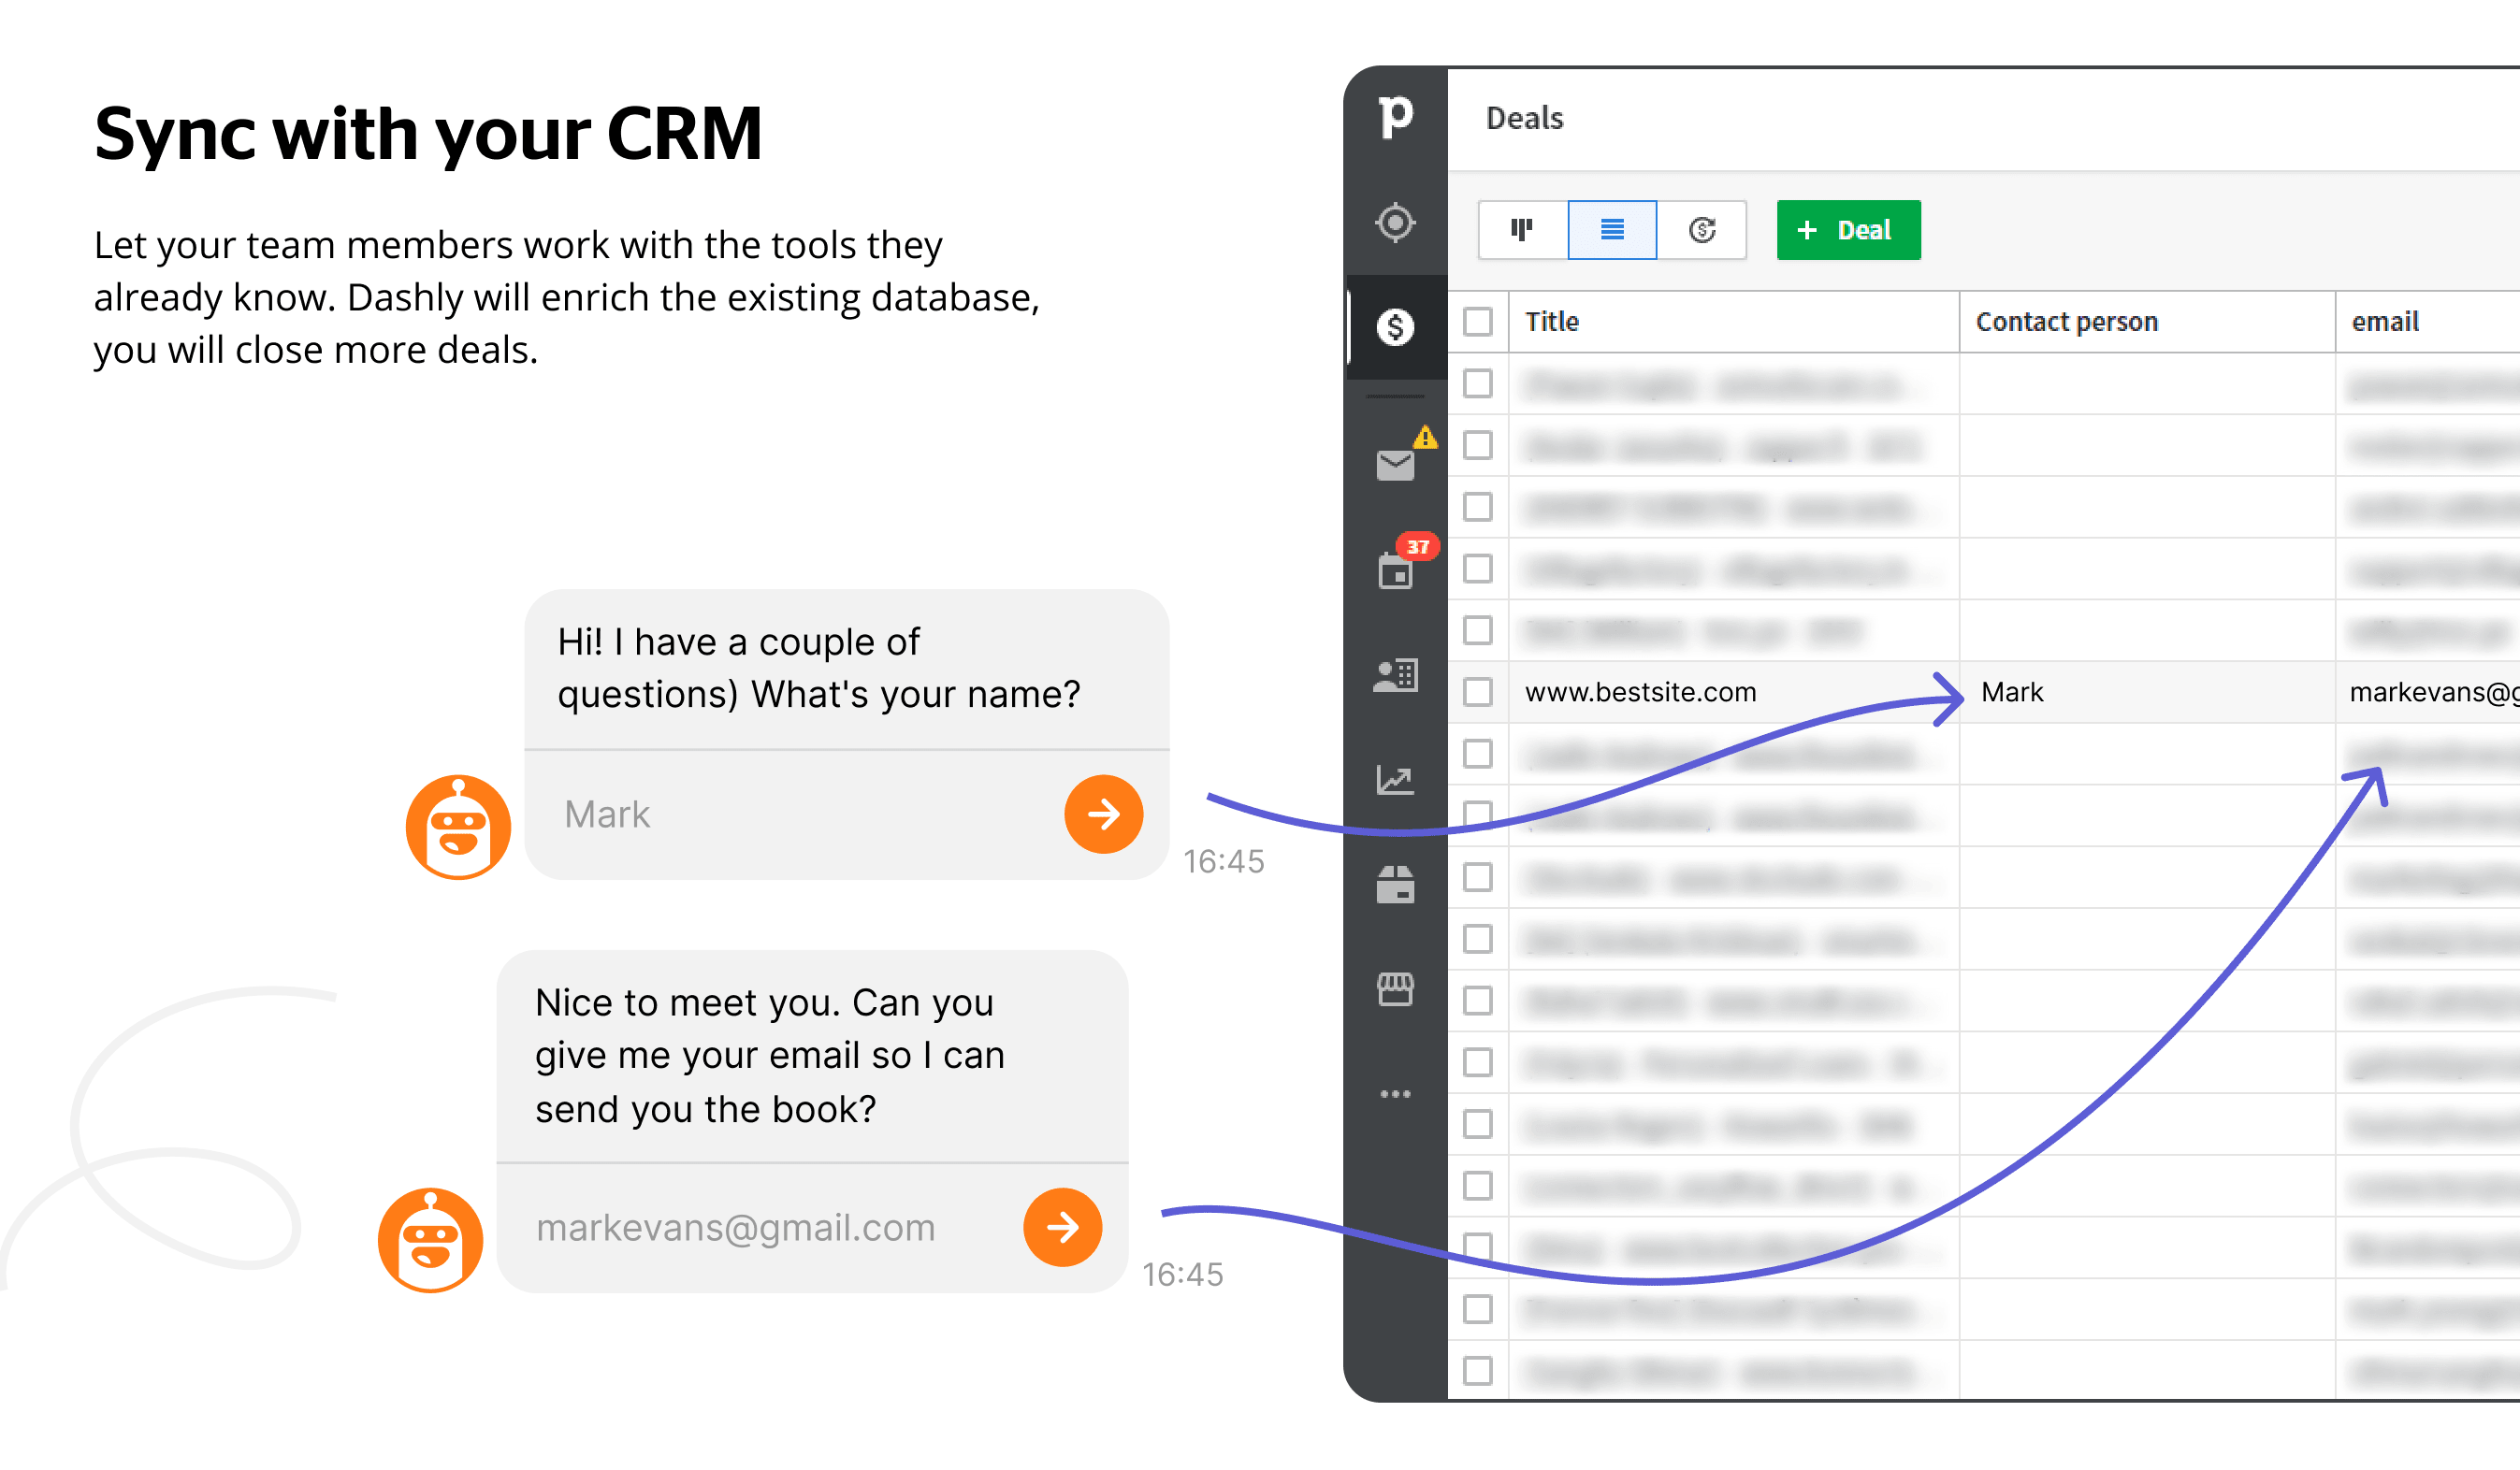 About integrations with CRM, analytics and other services